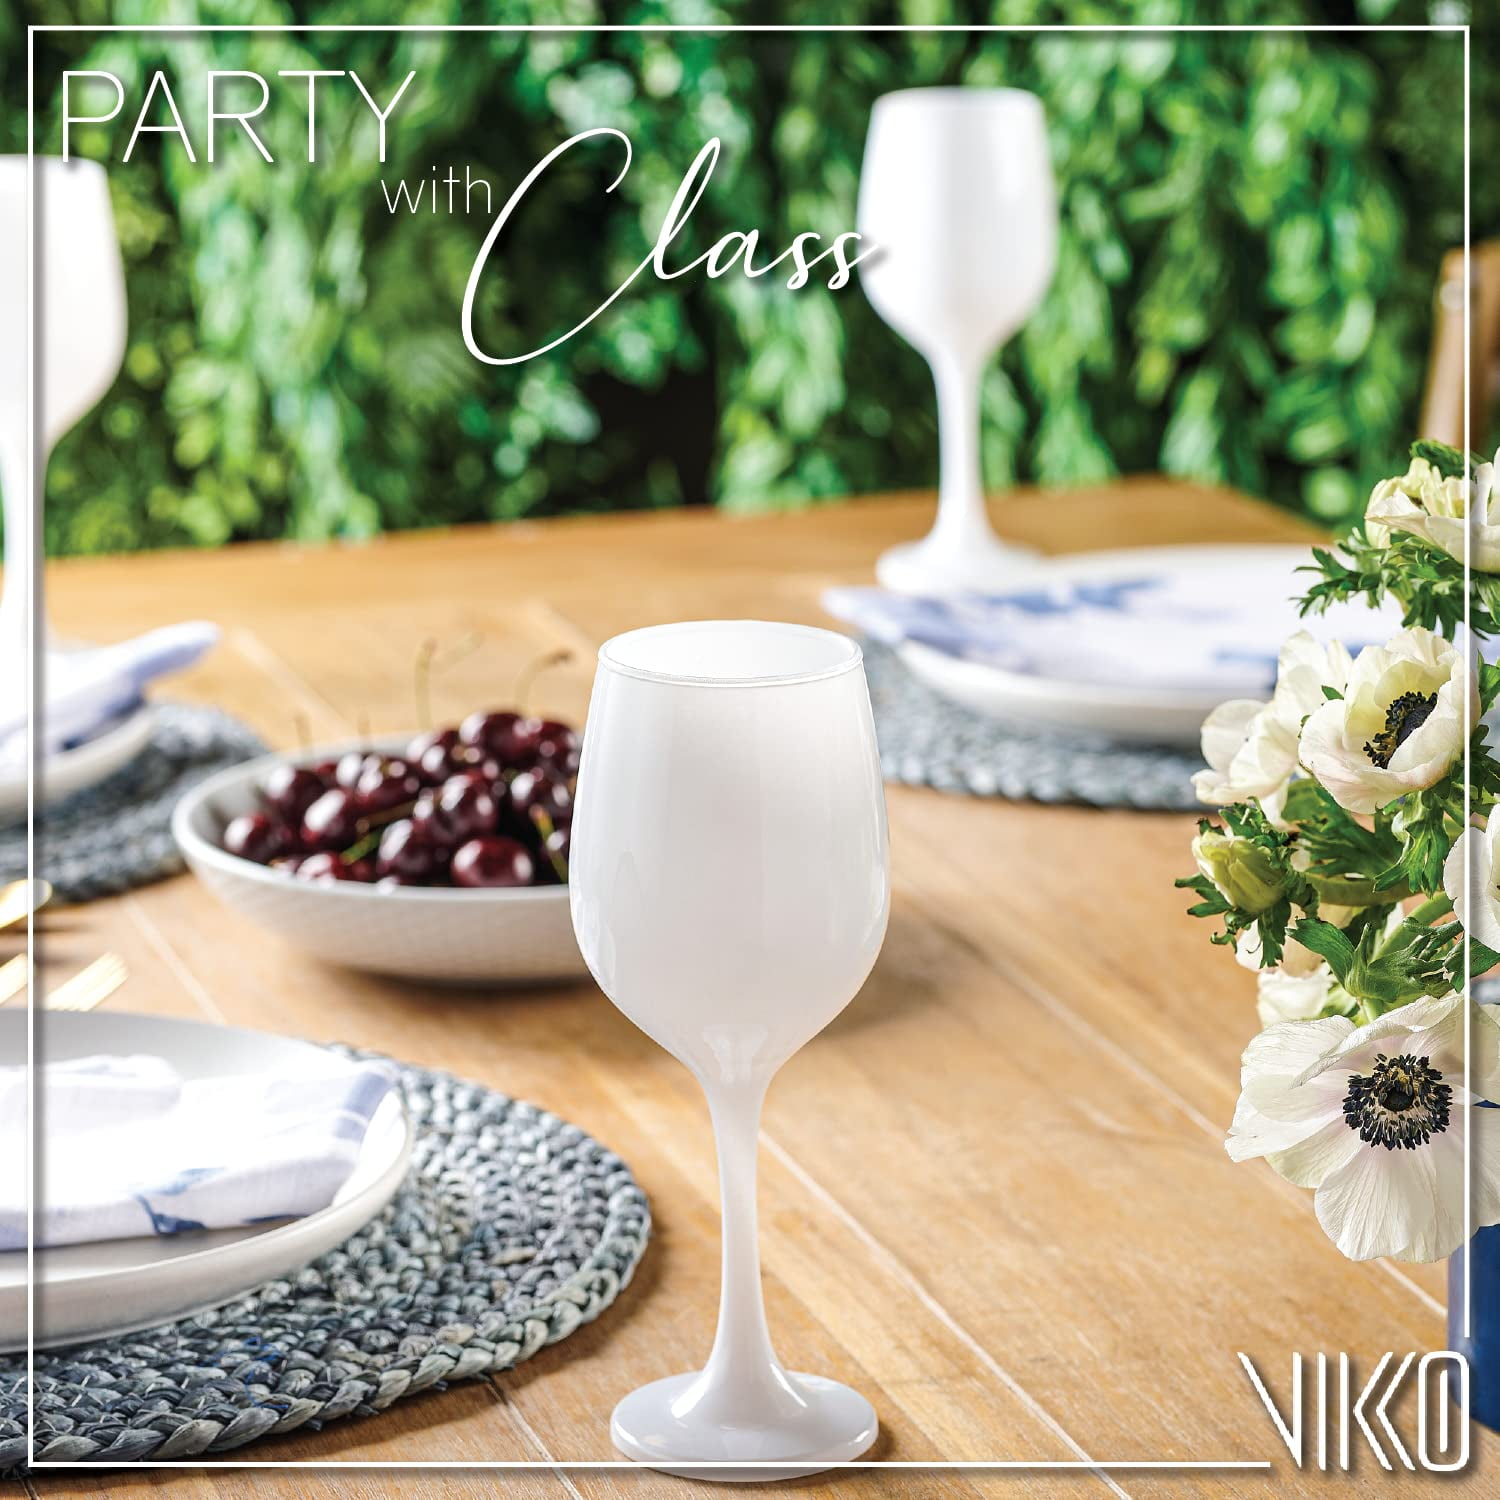 Vikko Décor Gold Wine Glasses: 11 oz Fancy Wine Glasses with Stem for Red and White Wine- Thick and Durable Wine Glass- Dishwasher Safe - Great for